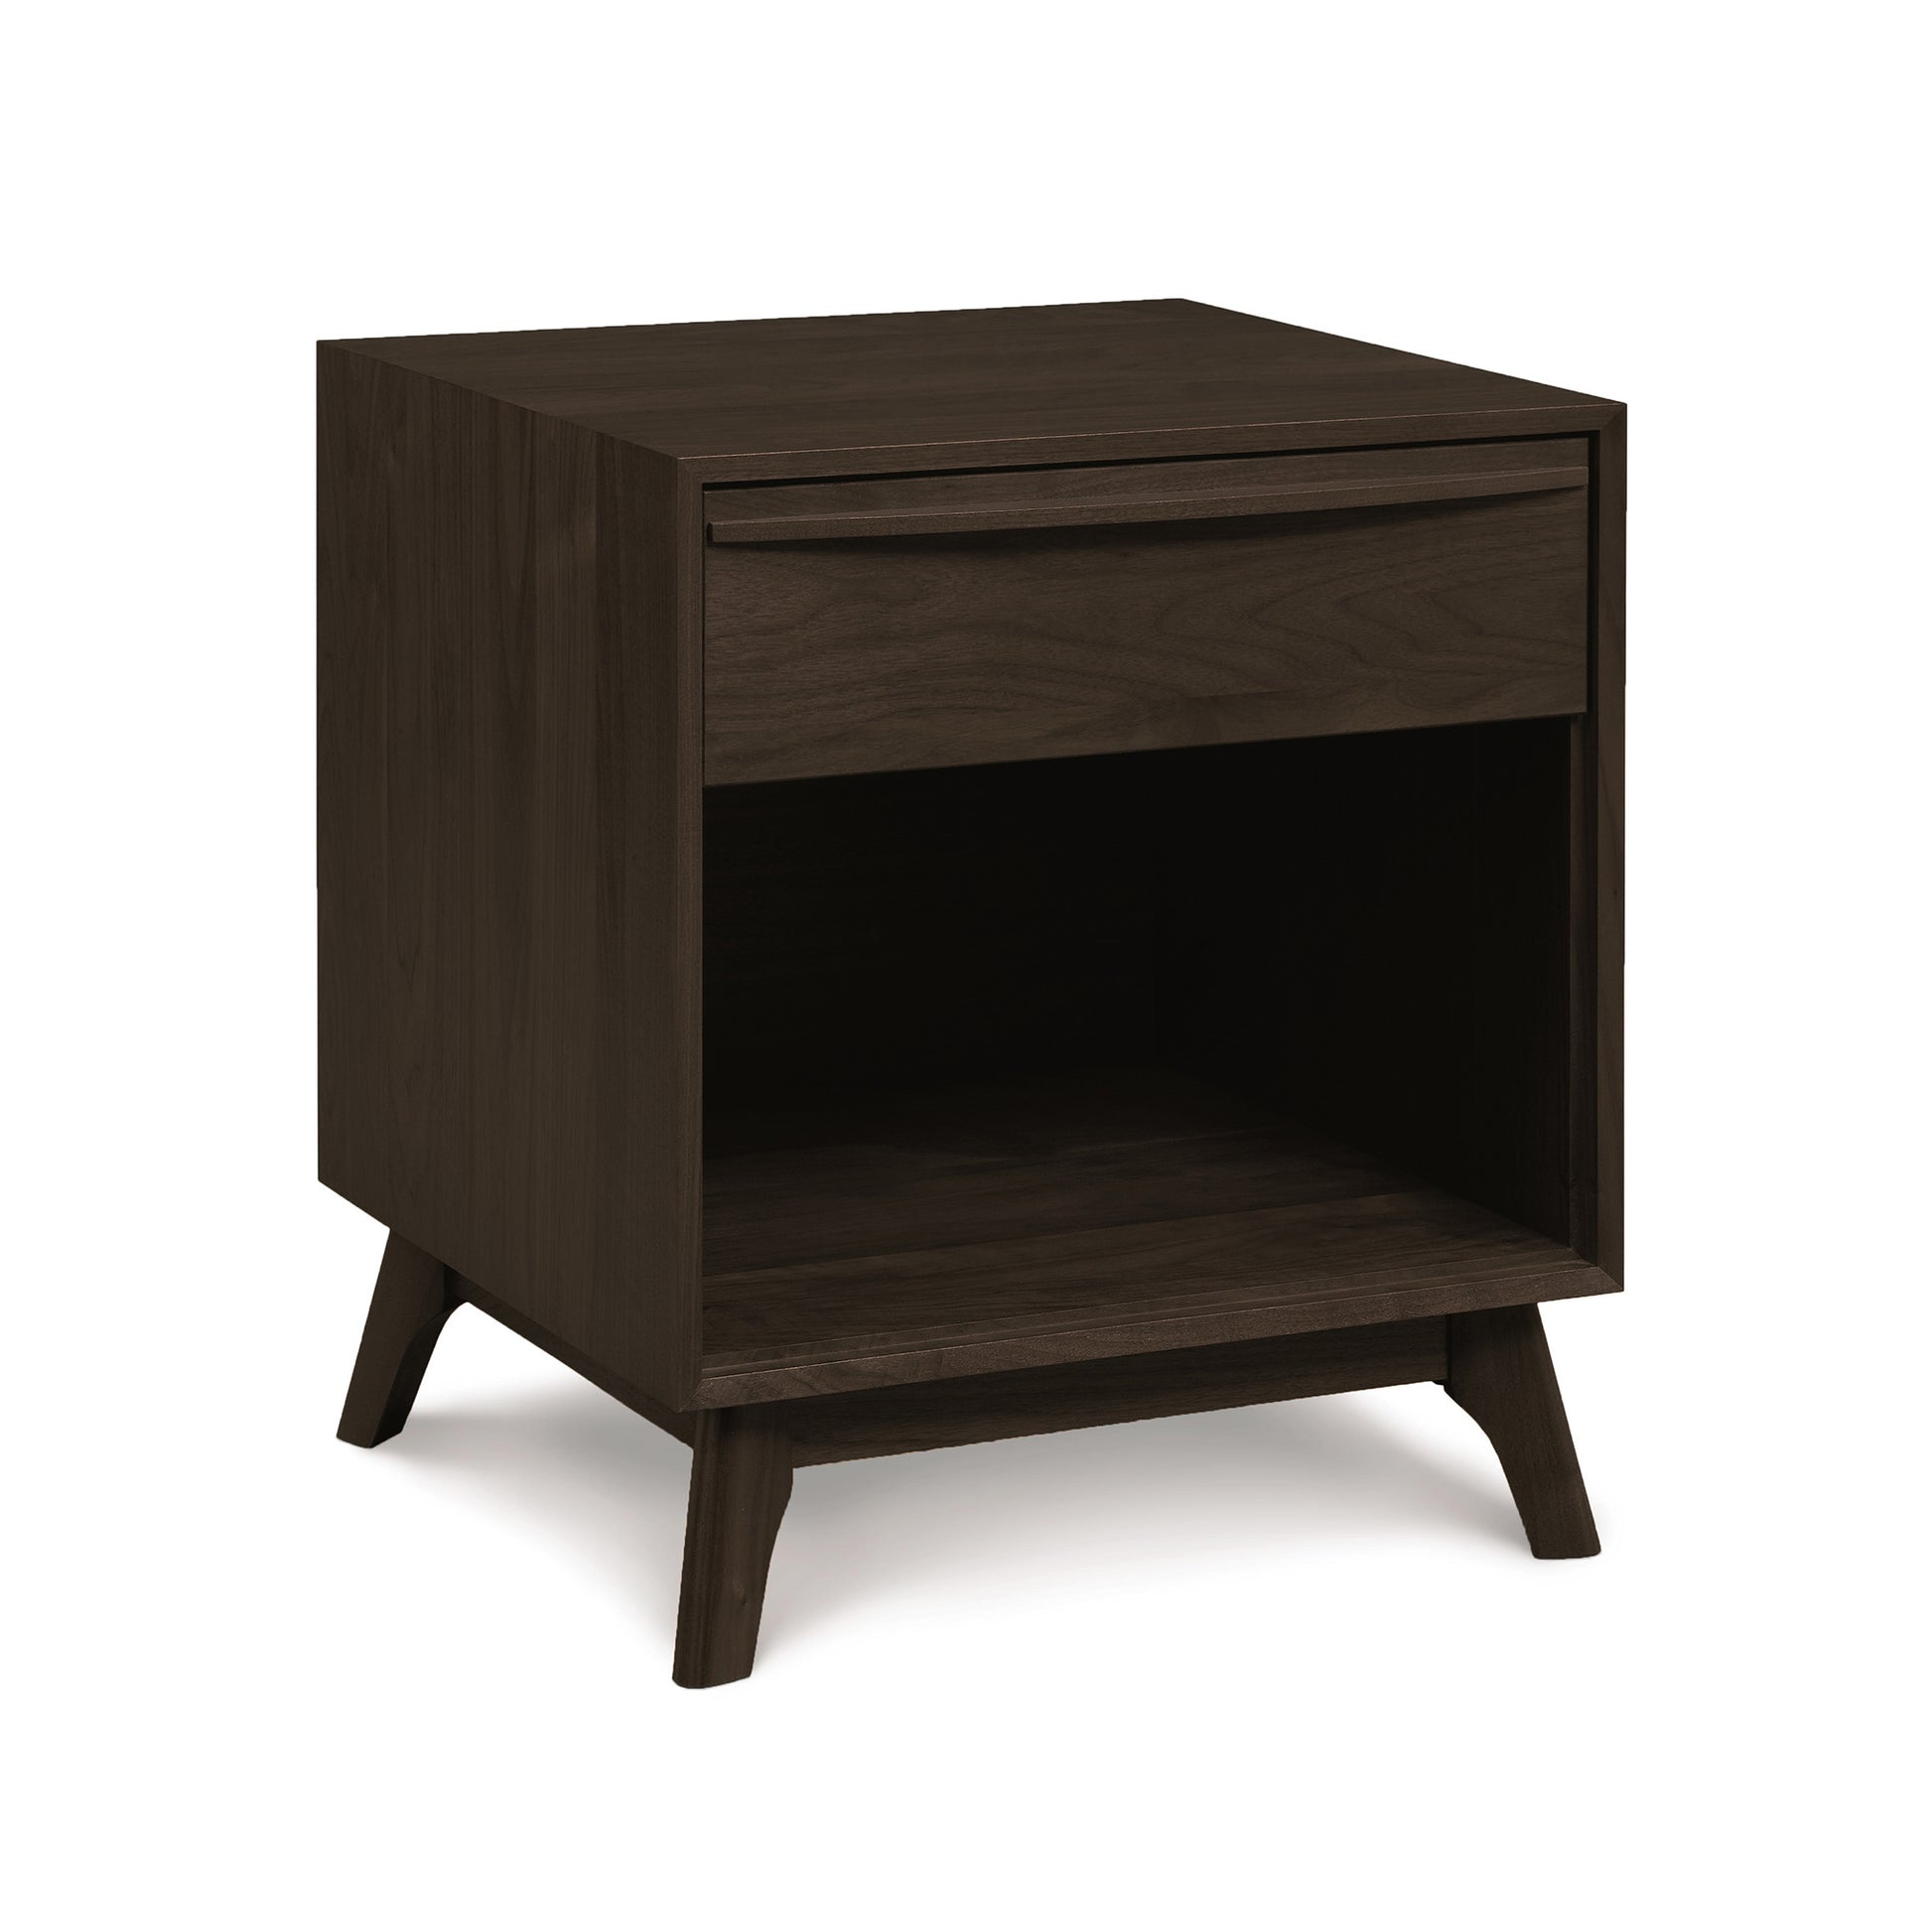 A Copeland Furniture Catalina 1-Drawer Enclosed Shelf Nightstand with a single drawer and an open lower shelf, set on angled legs.